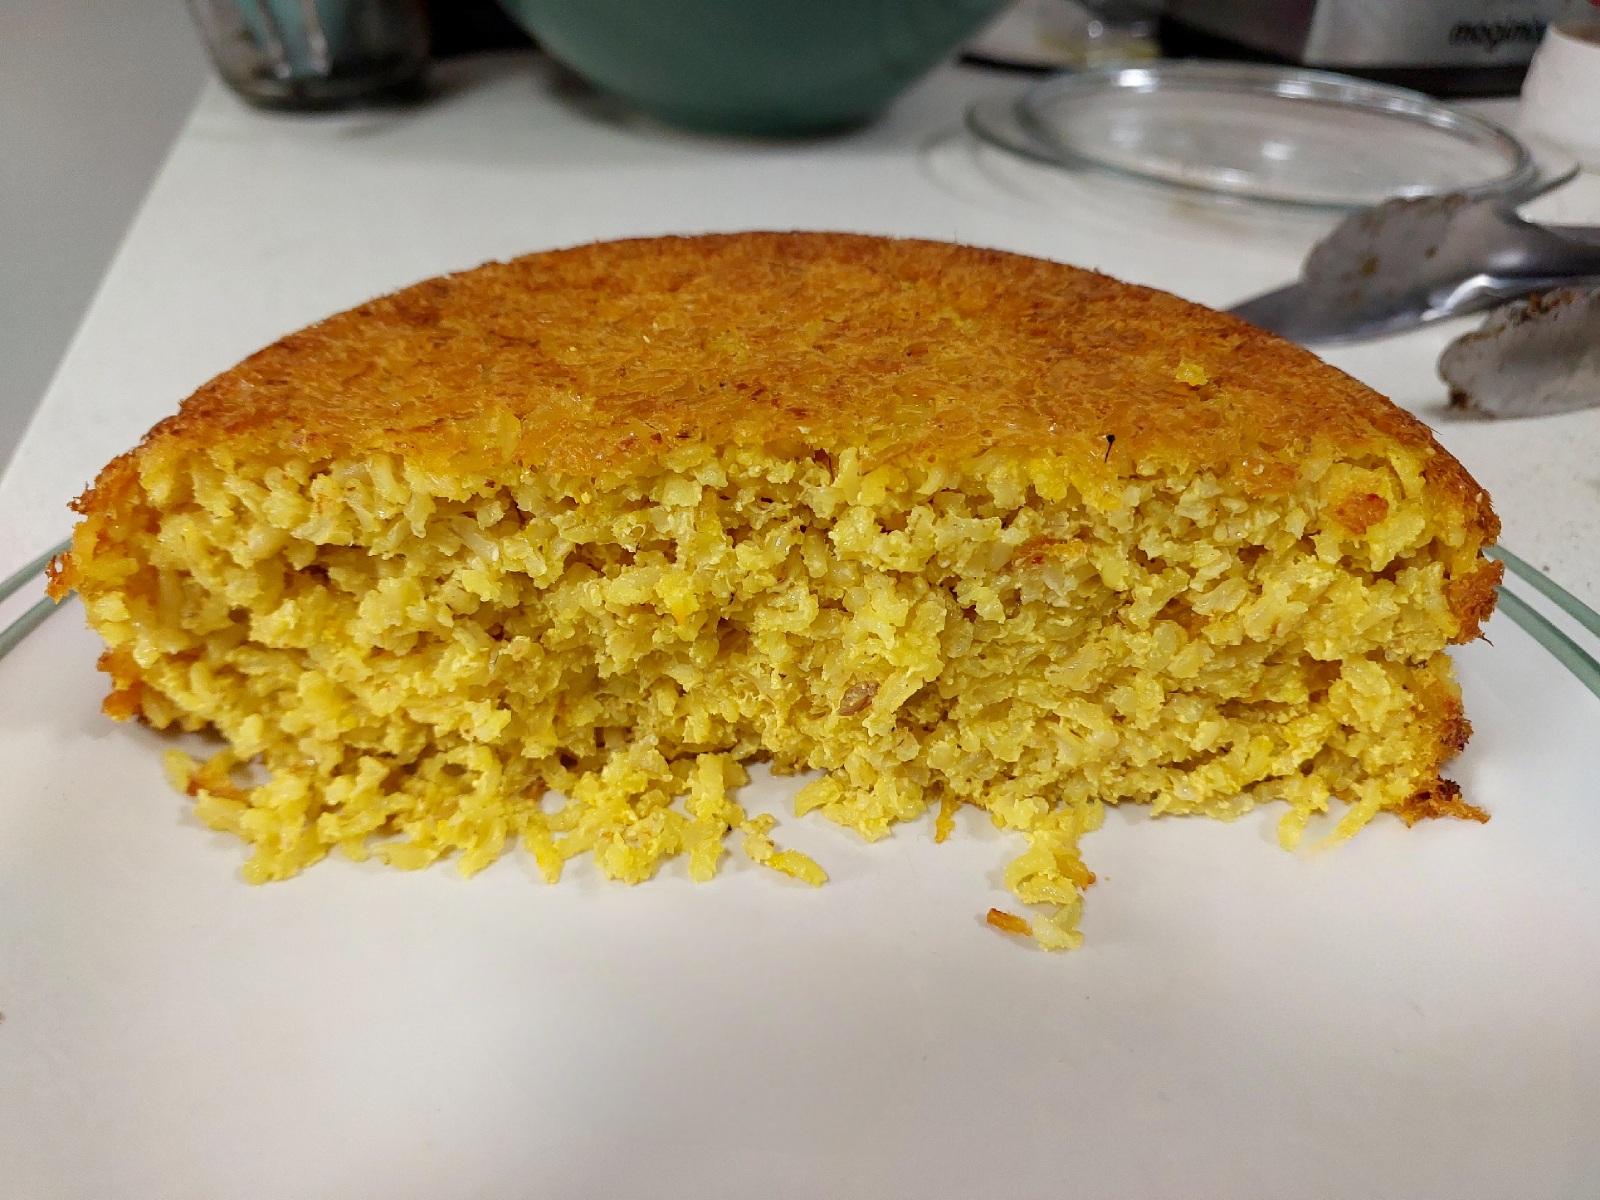 Half of the baked Persian saffron rice cake